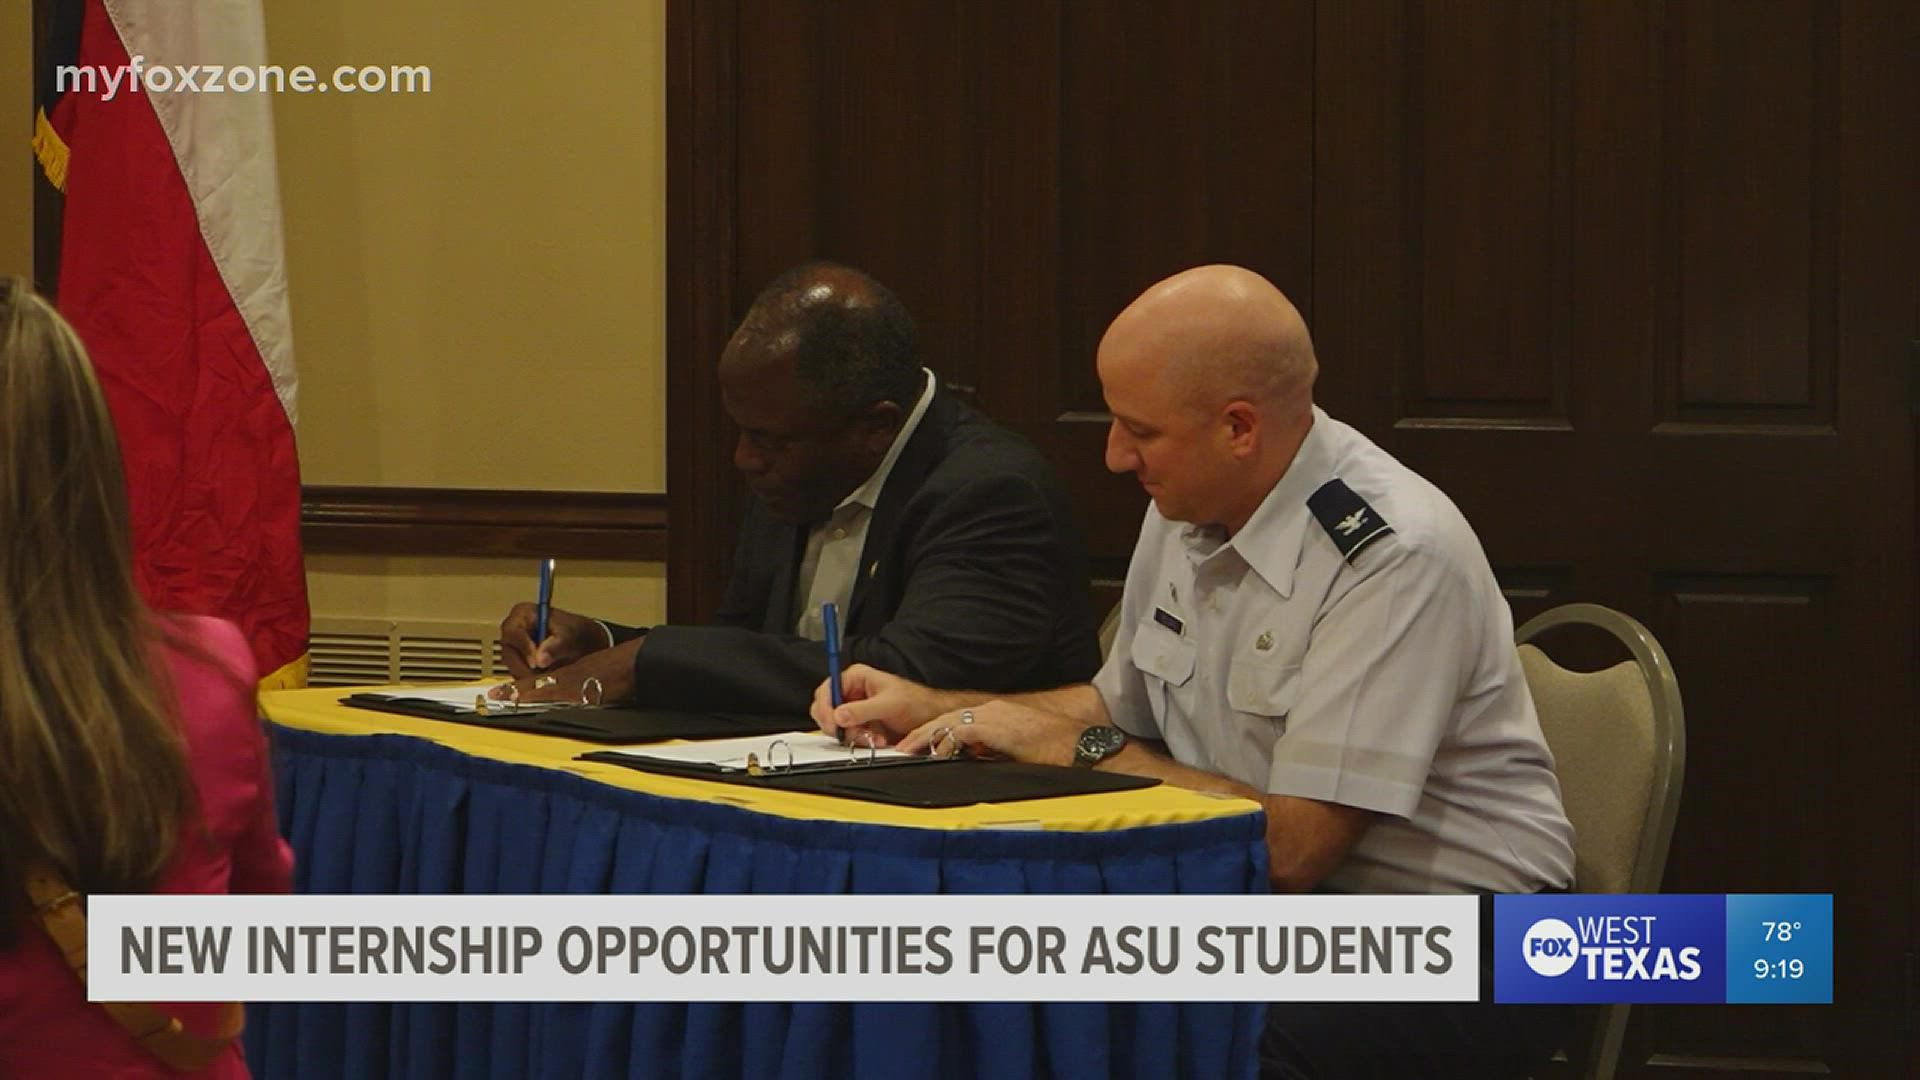 ASU and Goodfellow AFB will collaborate to recruit qualified students for the internships.